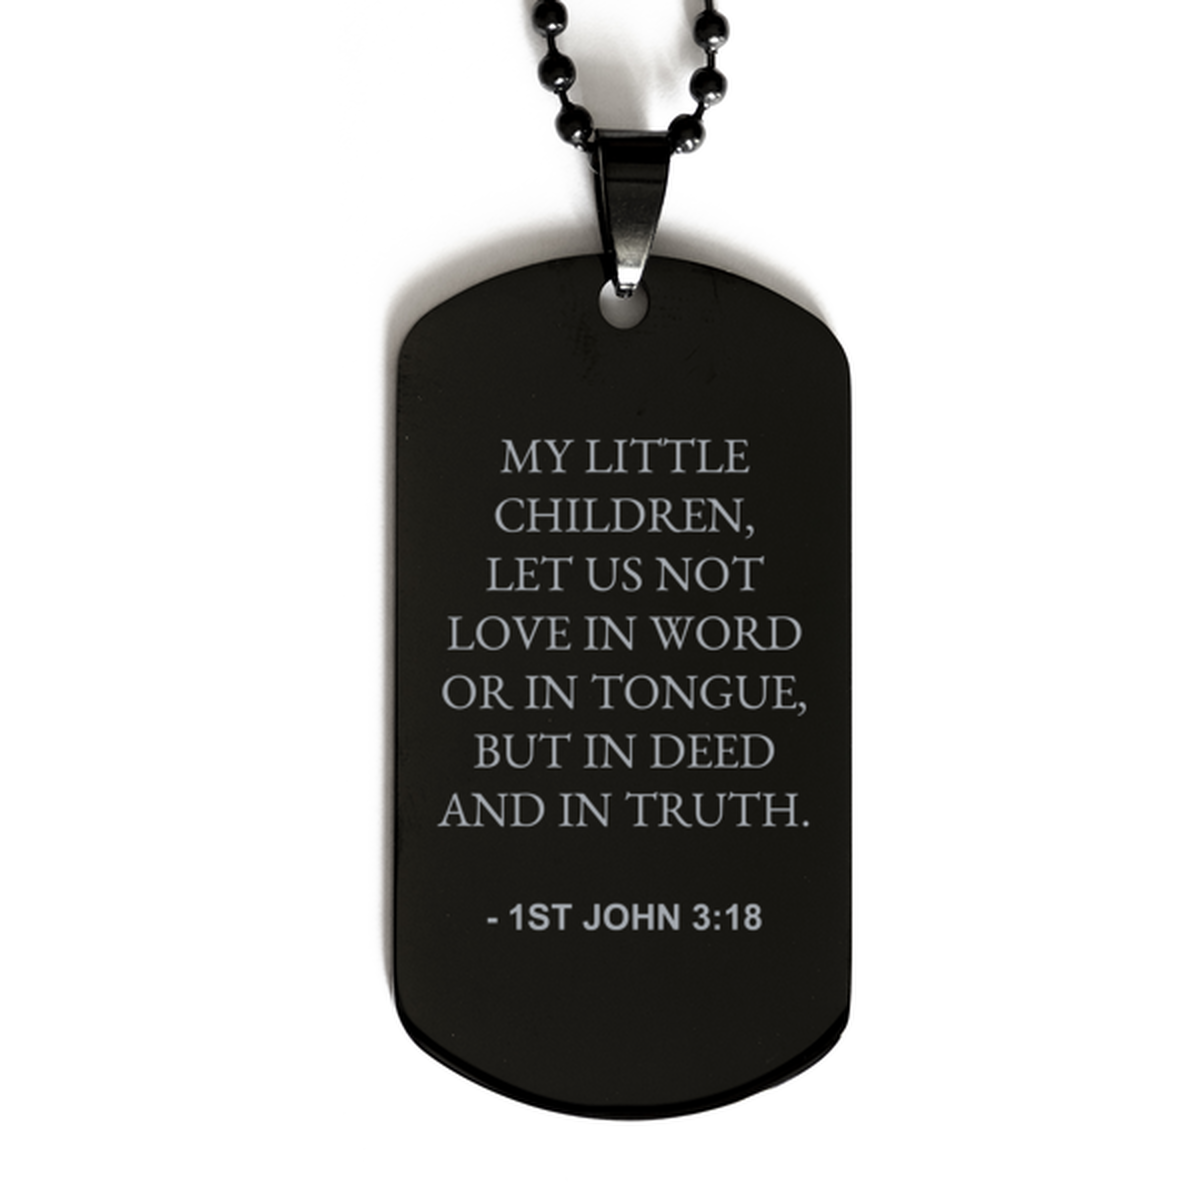 Bible Verse Black Dog Tag, 1St John 3:18 My Little Children Let Us Not Love In Word Or, Christian Inspirational Necklace Gifts For Men Women